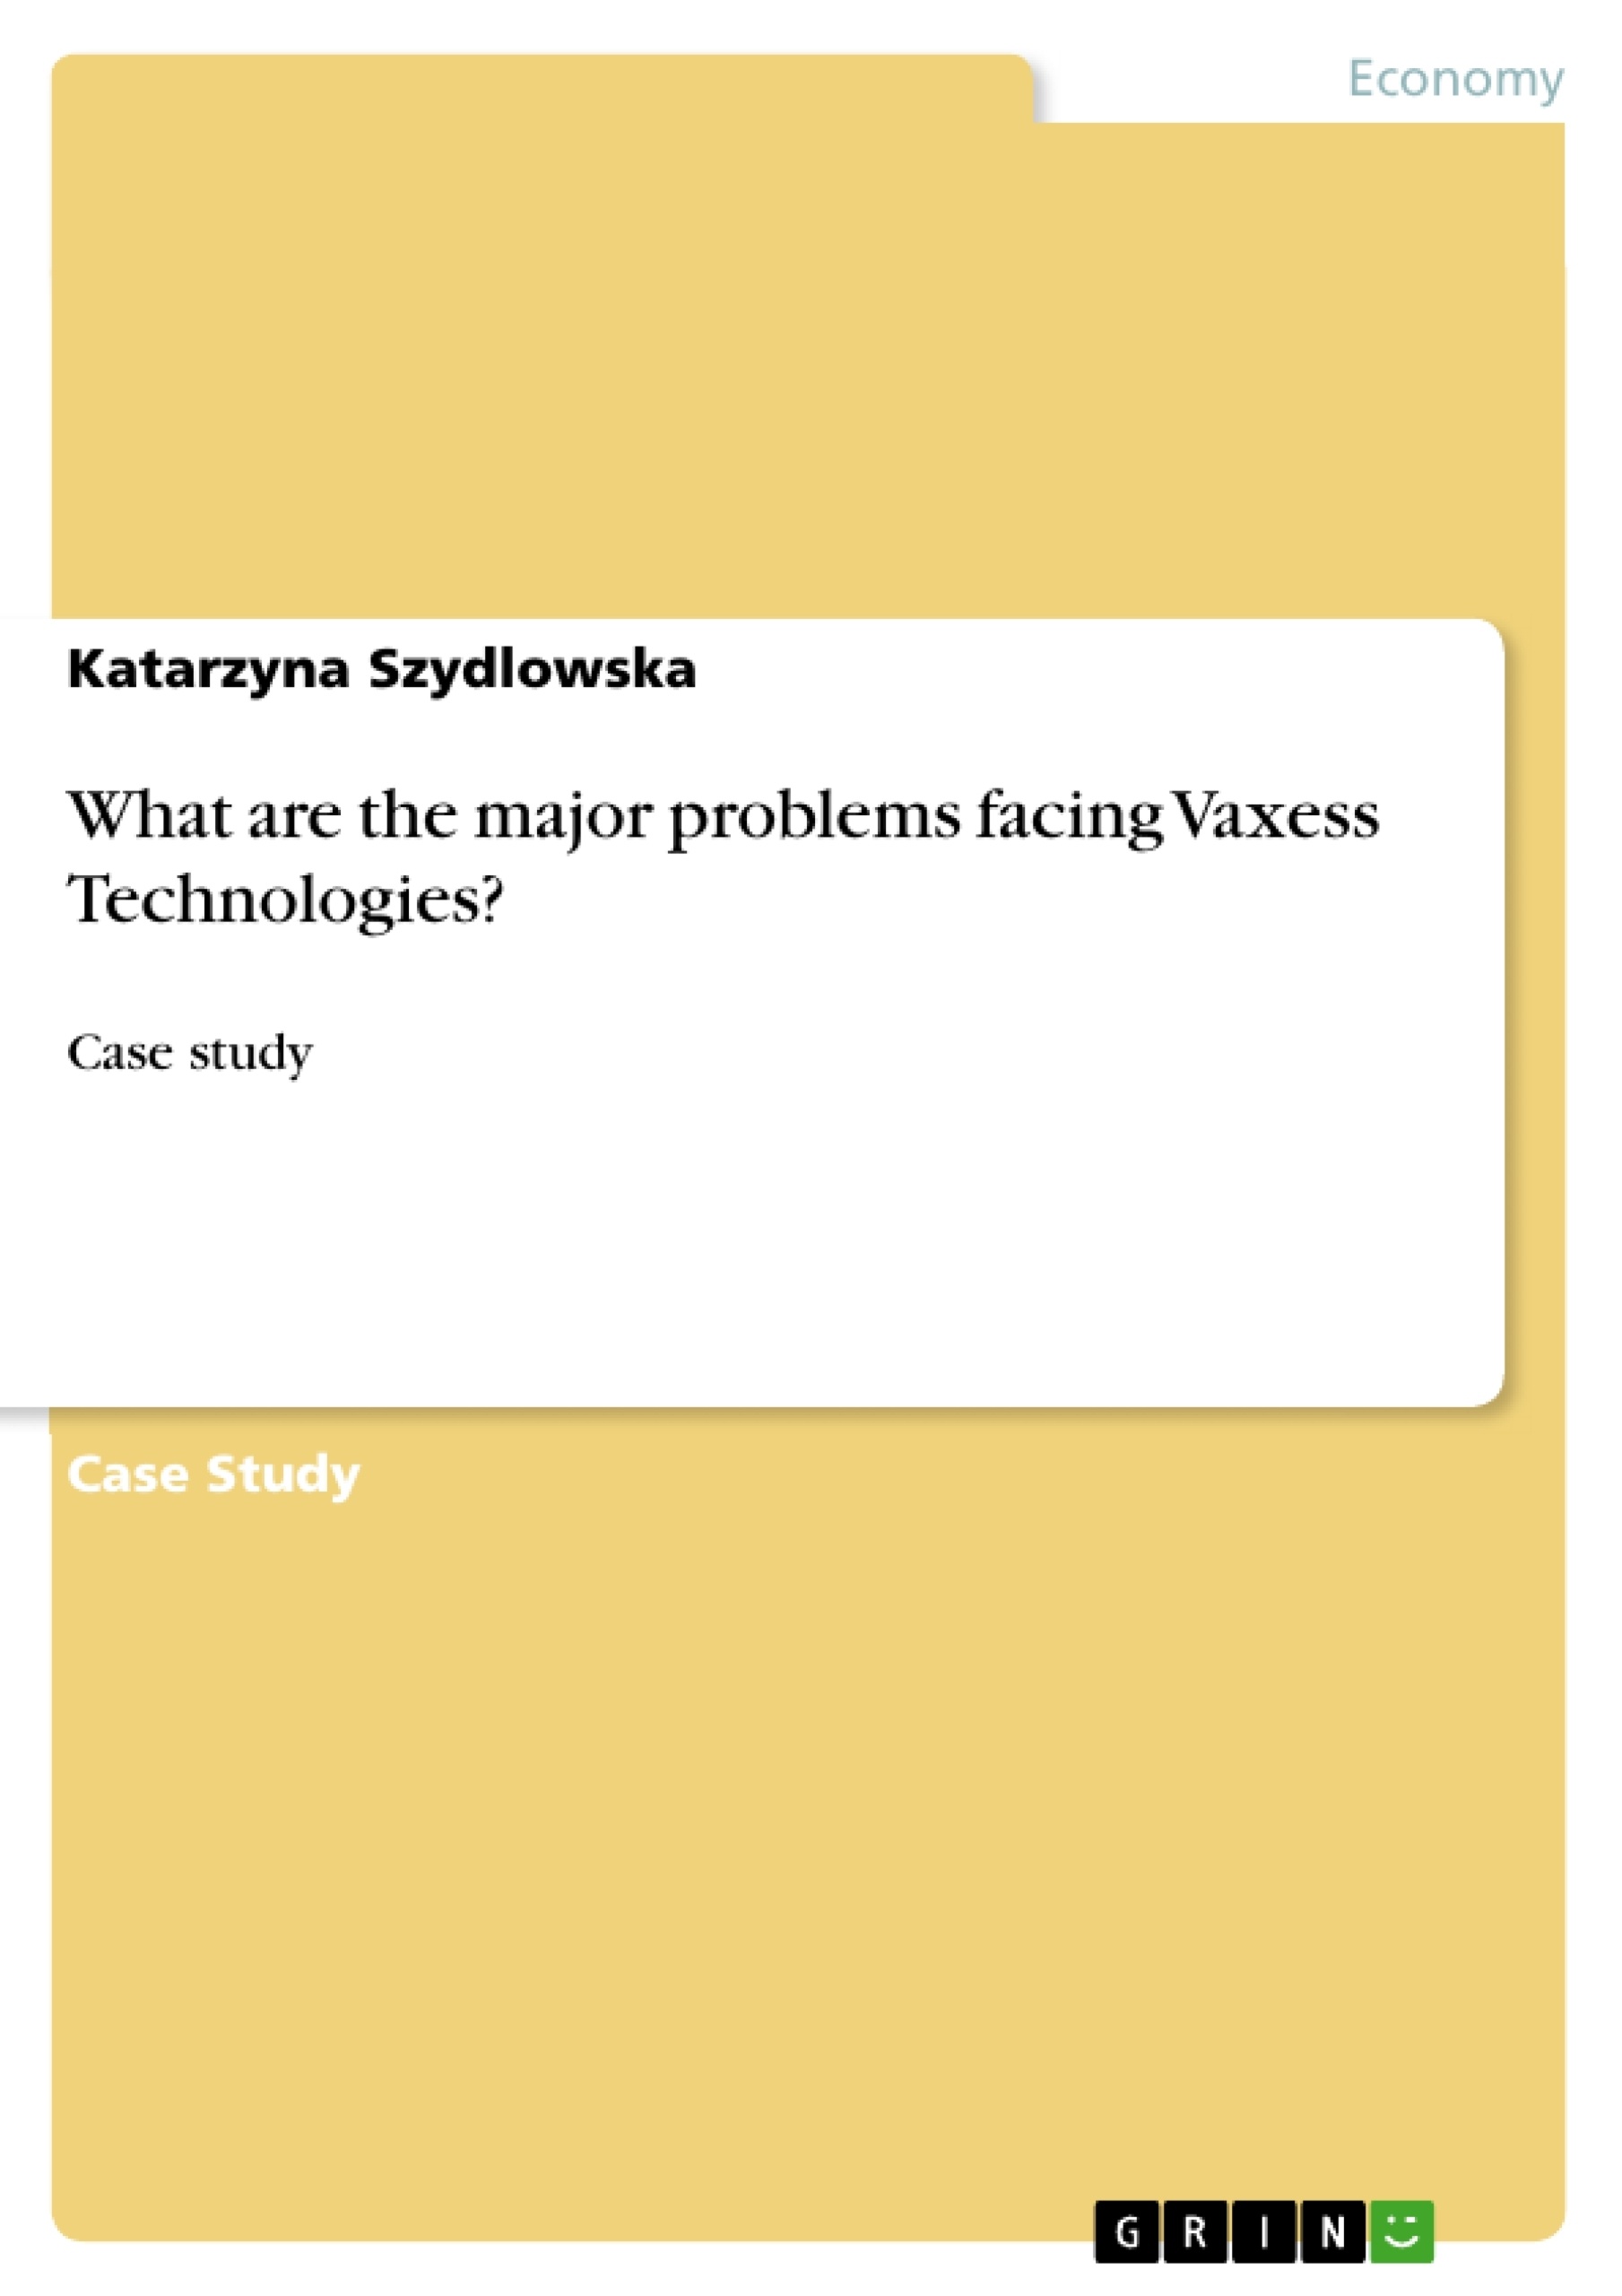 Titre: What are the major problems facing Vaxess Technologies?